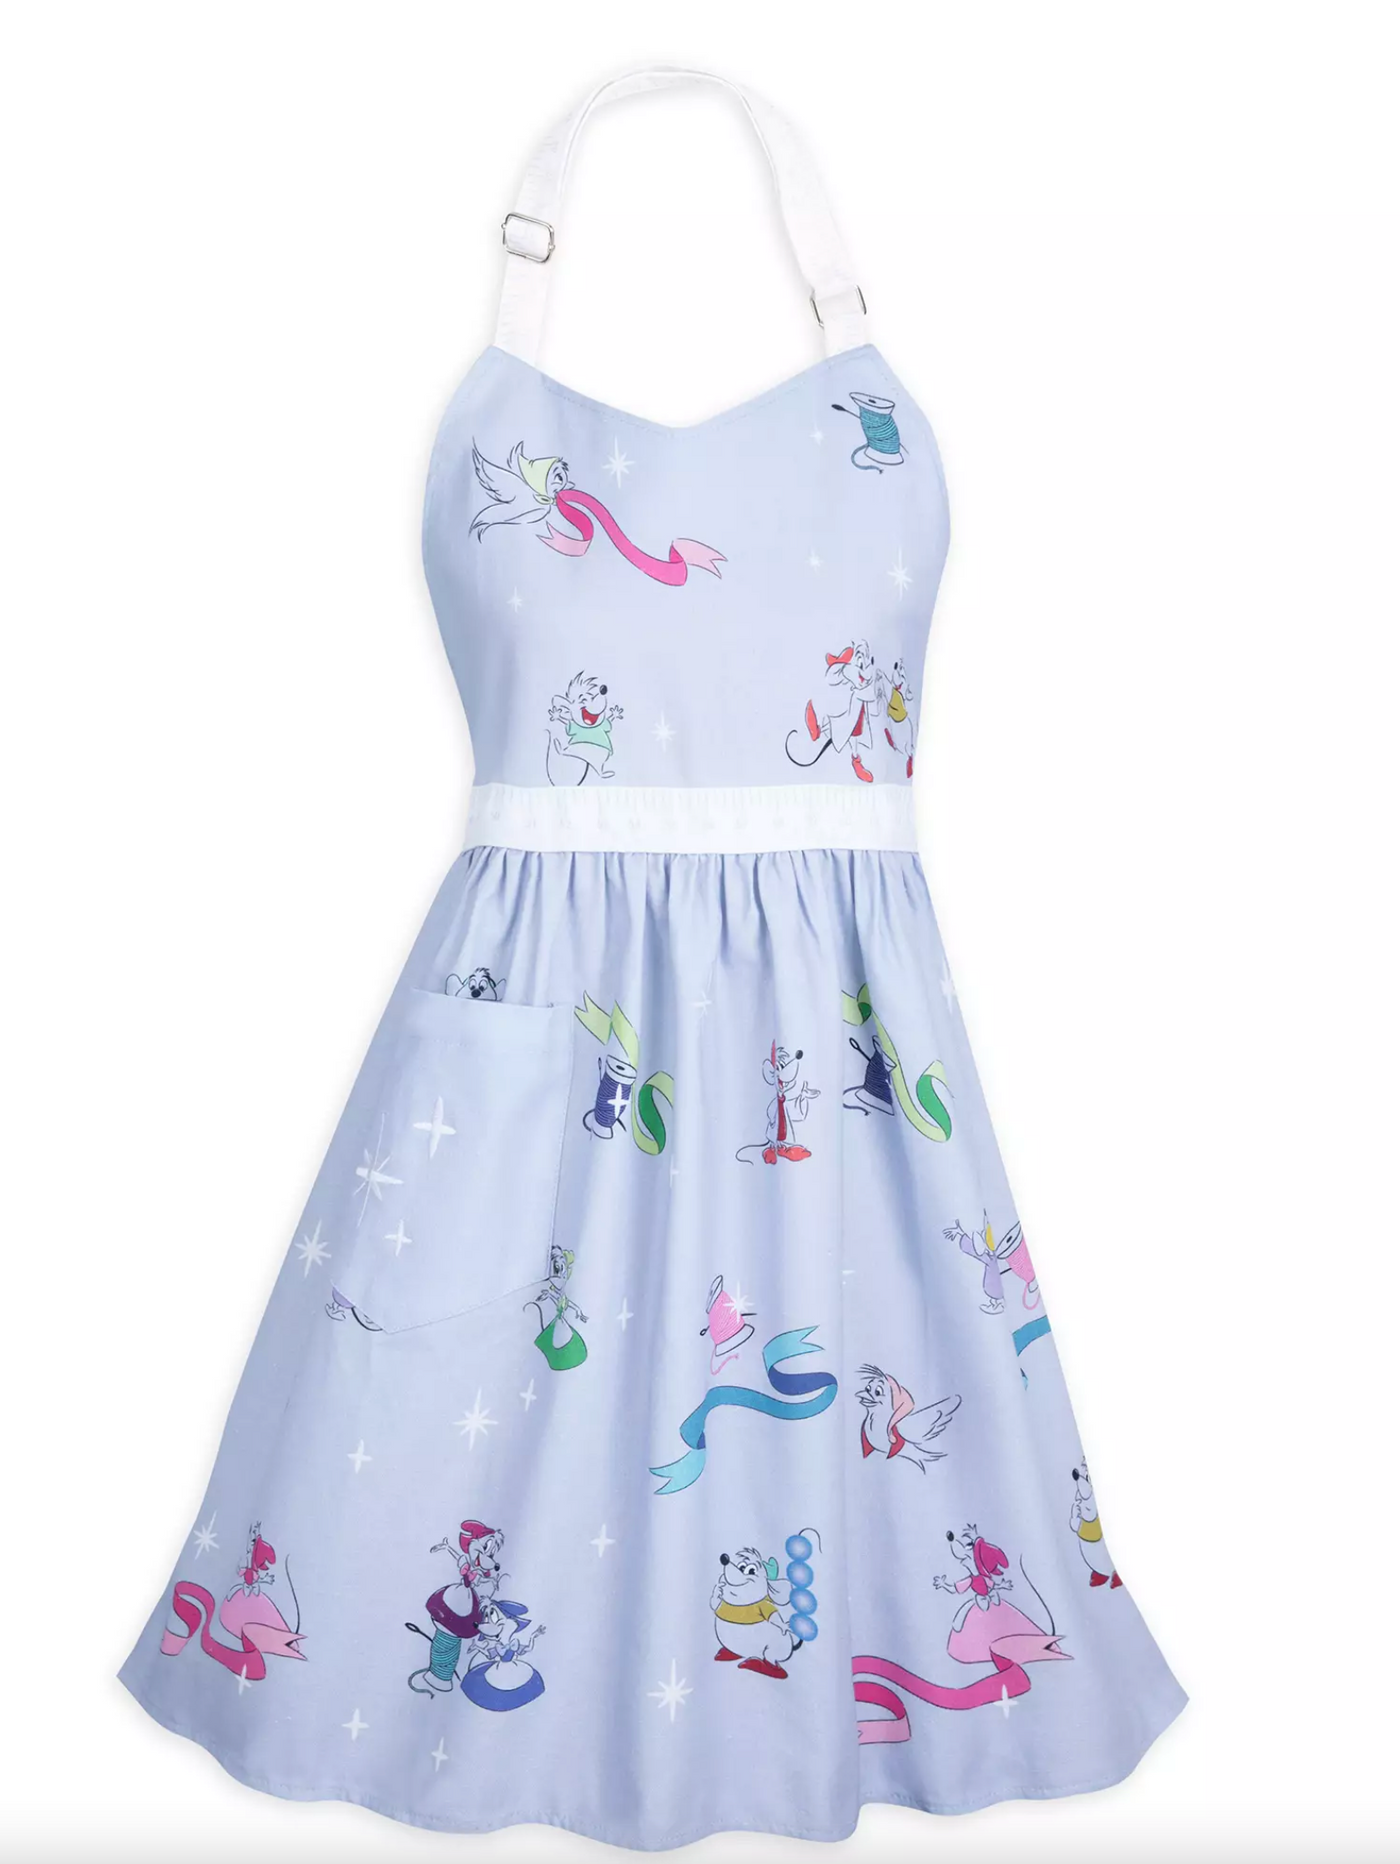 Disney Cinderella Friends Apron for Adults New with tag